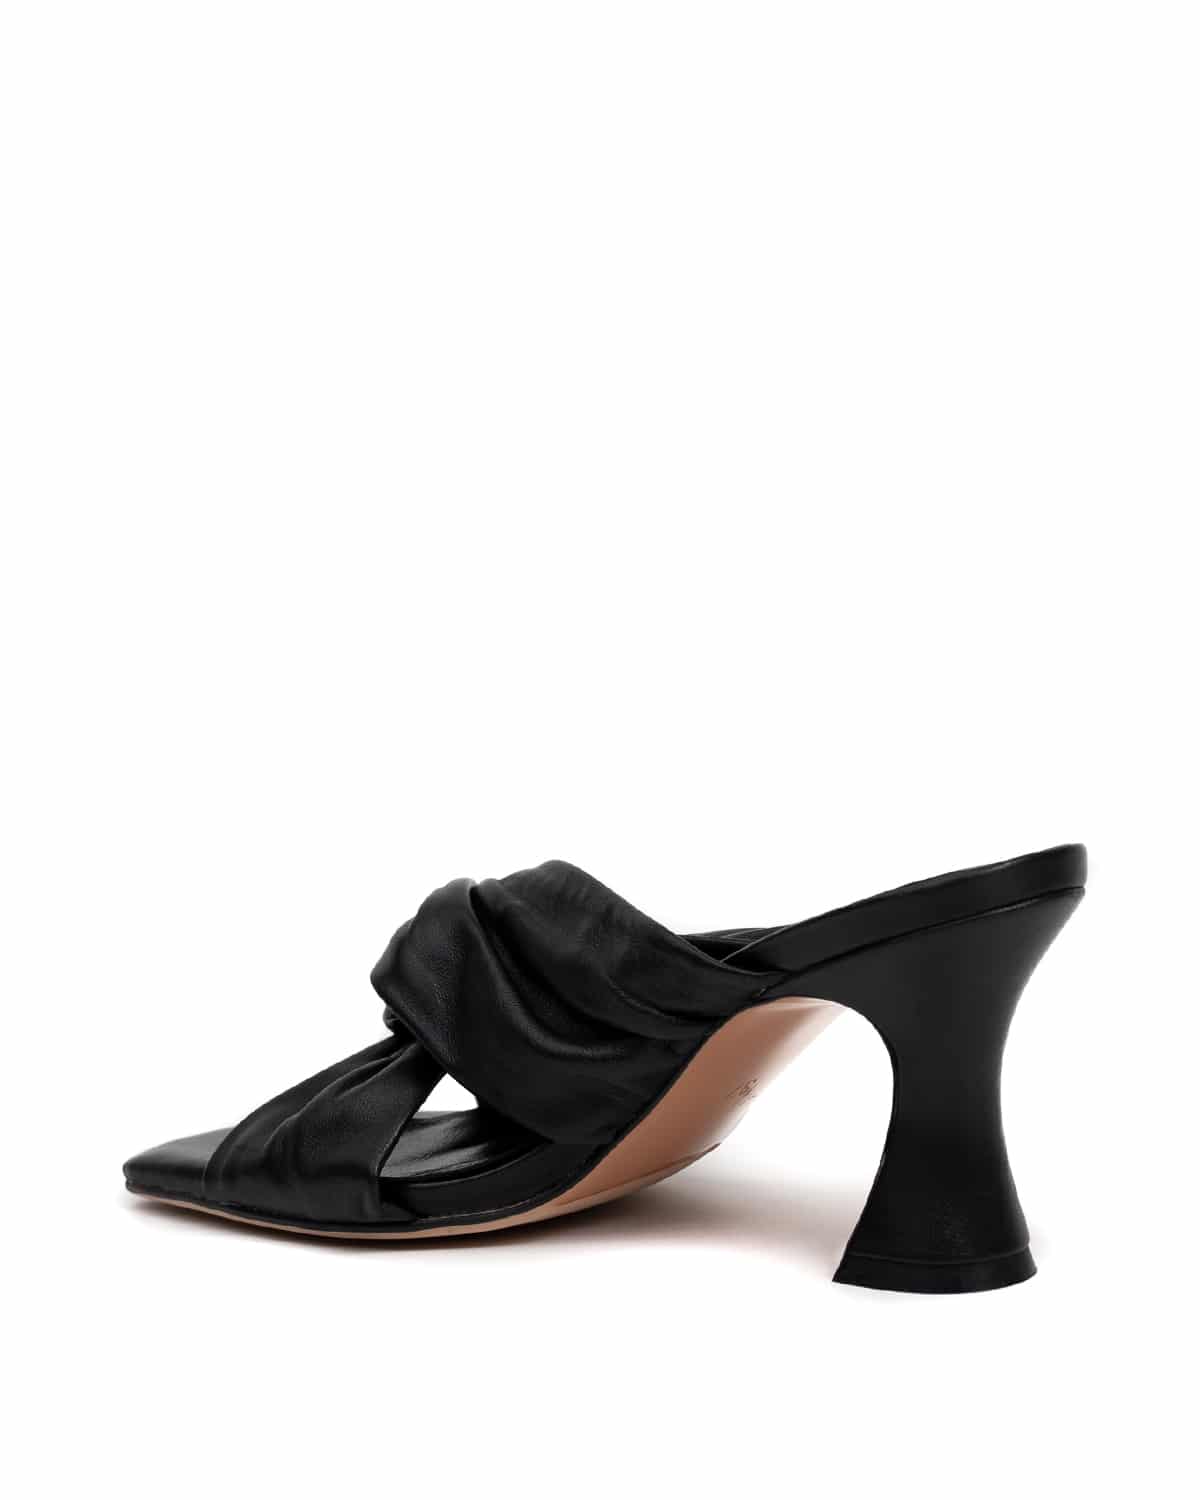 Mule-style pump - Anna shoes & more